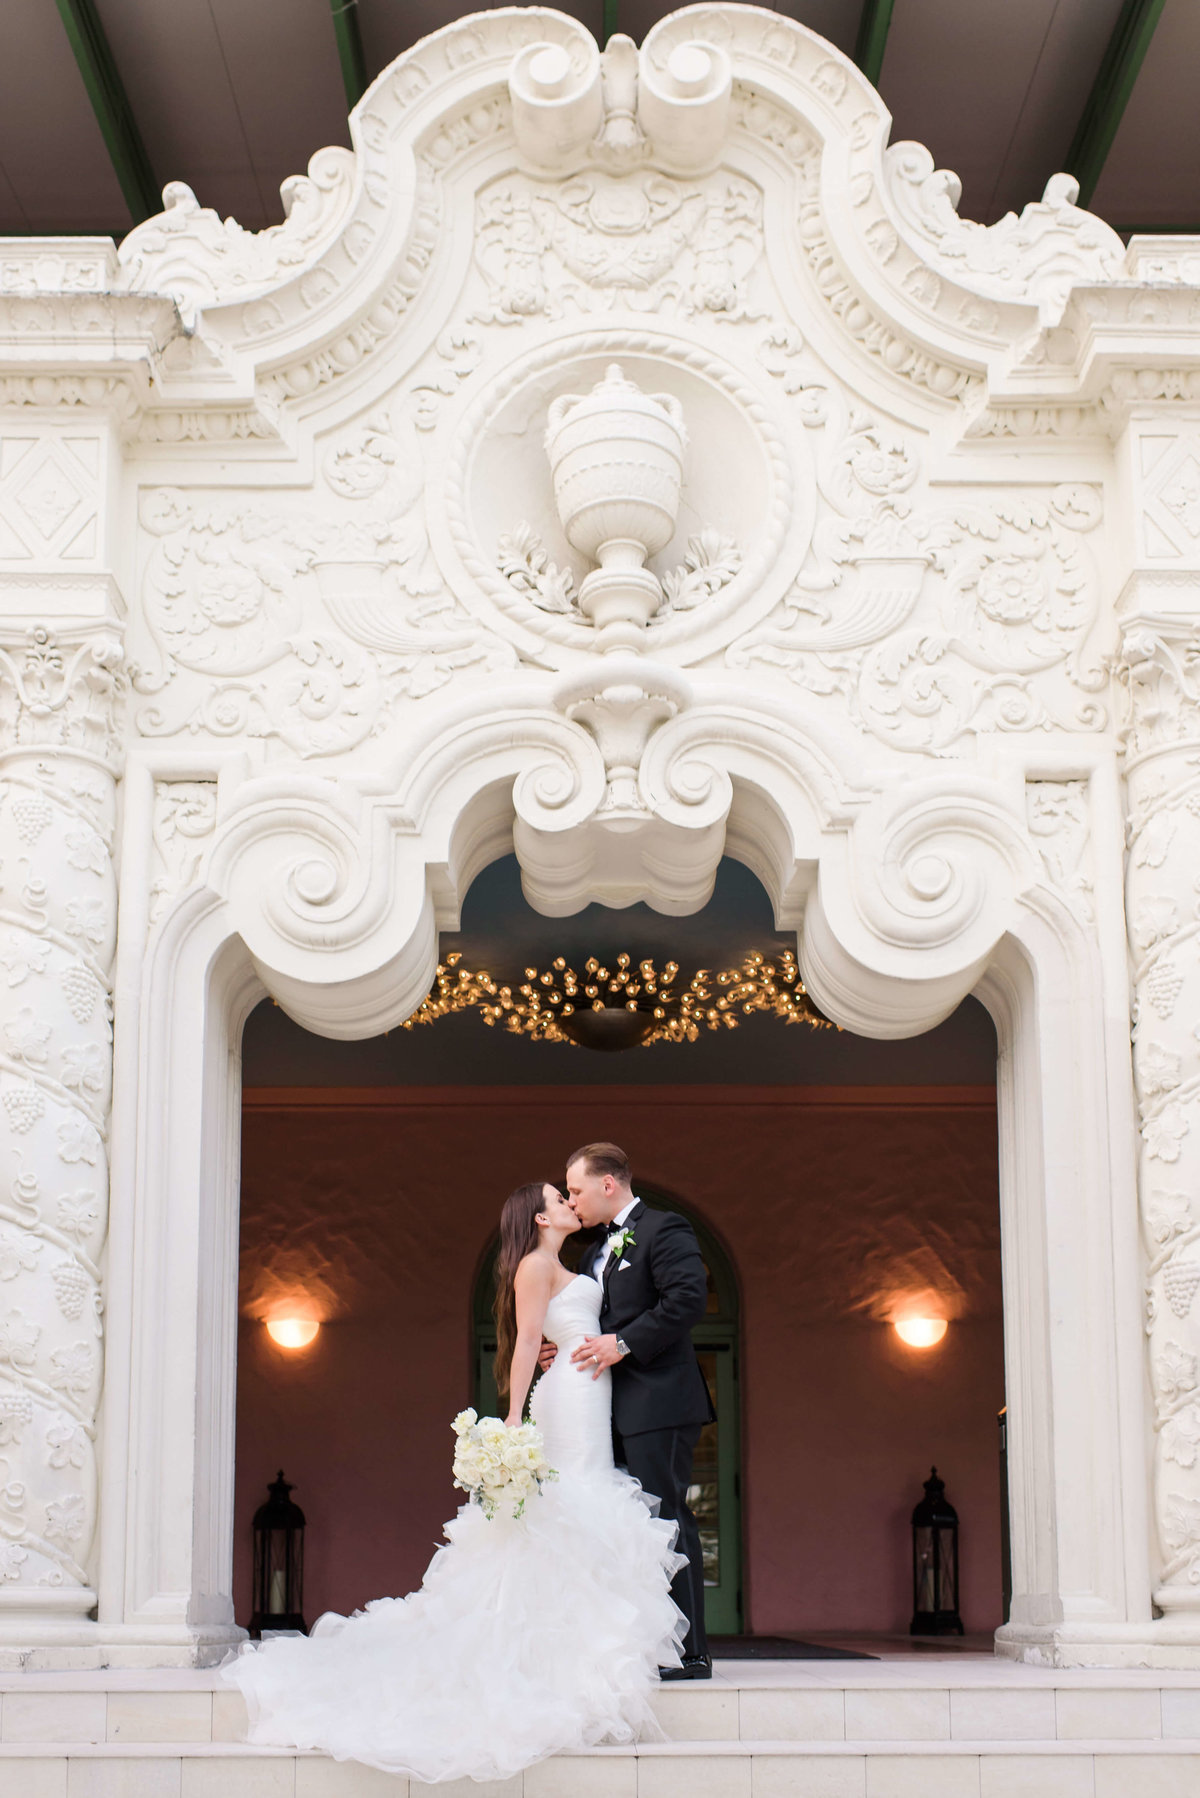 Bride and Groom kiss at the top of the elaborate stairs at the Vinoy Hotel in St. Petersburg, FL